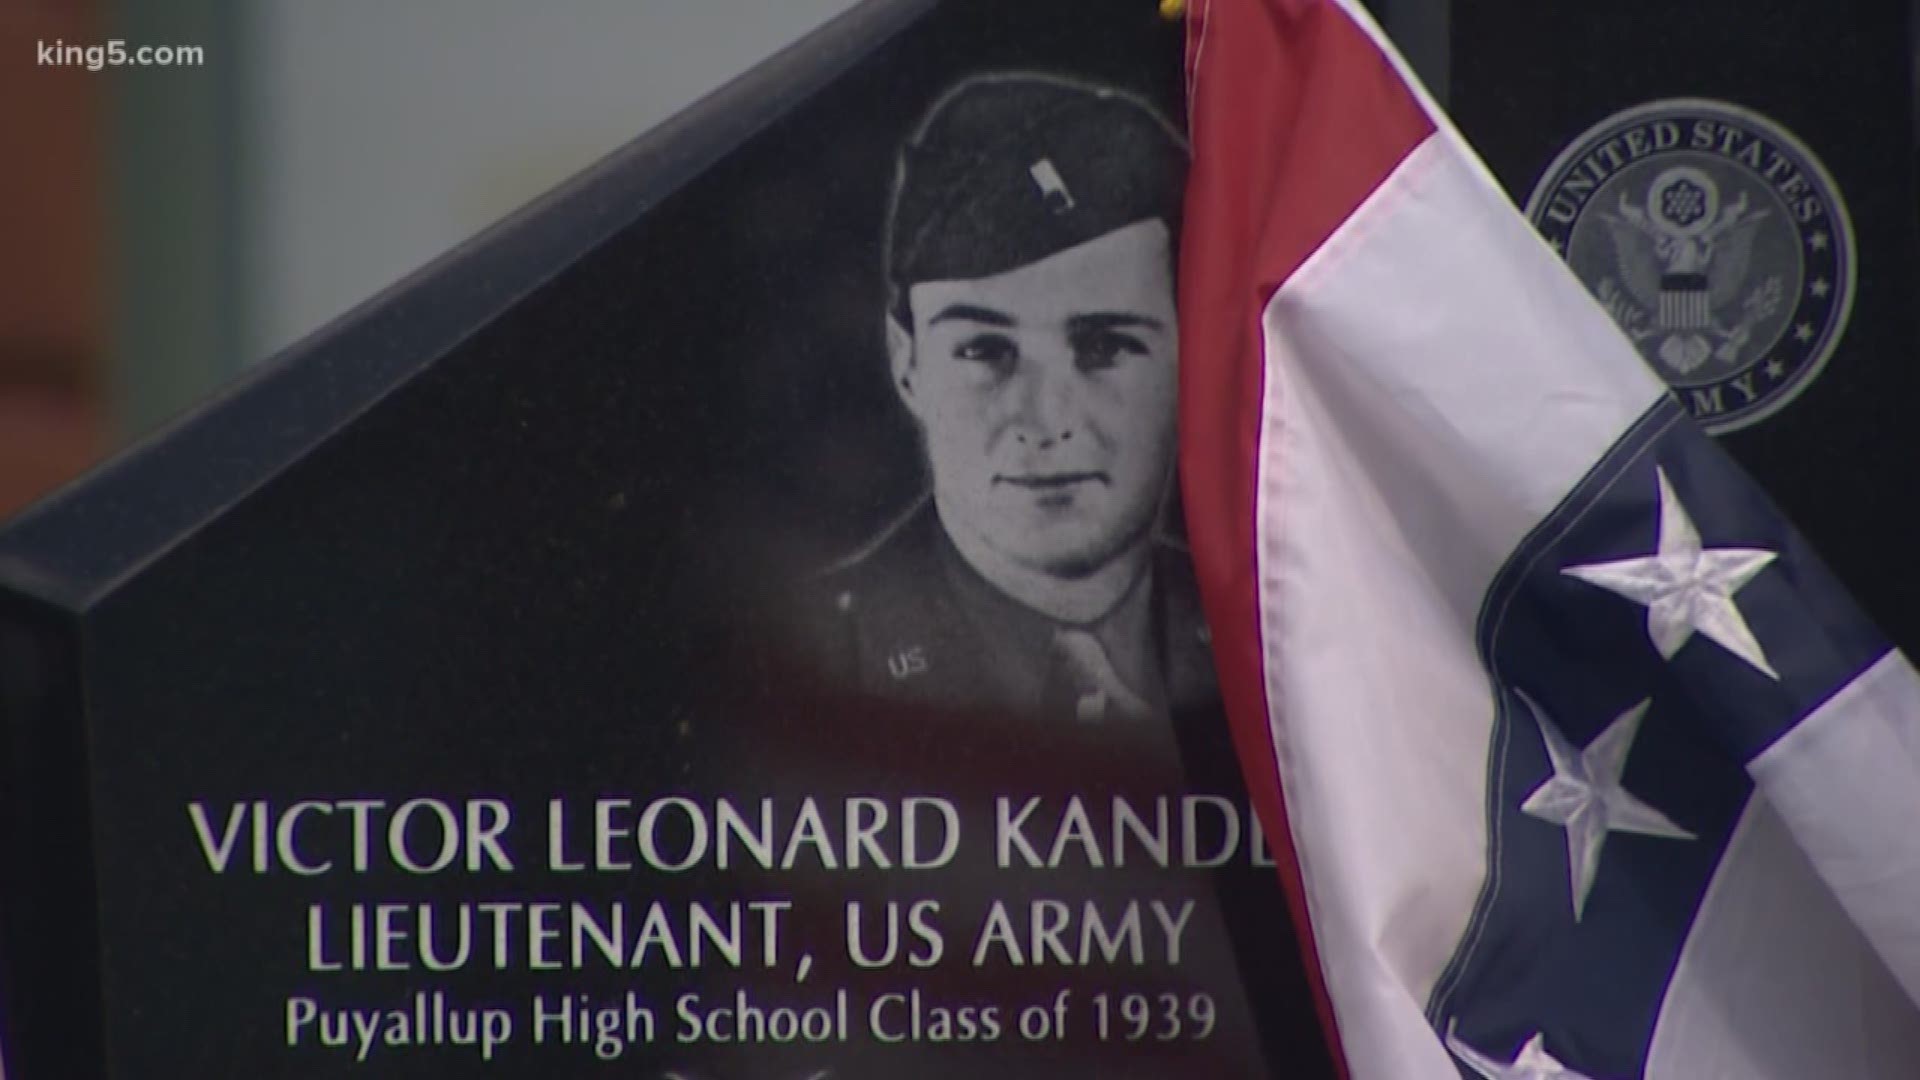 Army Lt. Victor Kandle was killed in WWII, and also honored with the Congressional Medal of Honor. Veterans in Puyallup dedicated a memorial to his memory. KING 5's Sebastian Robertson reports.